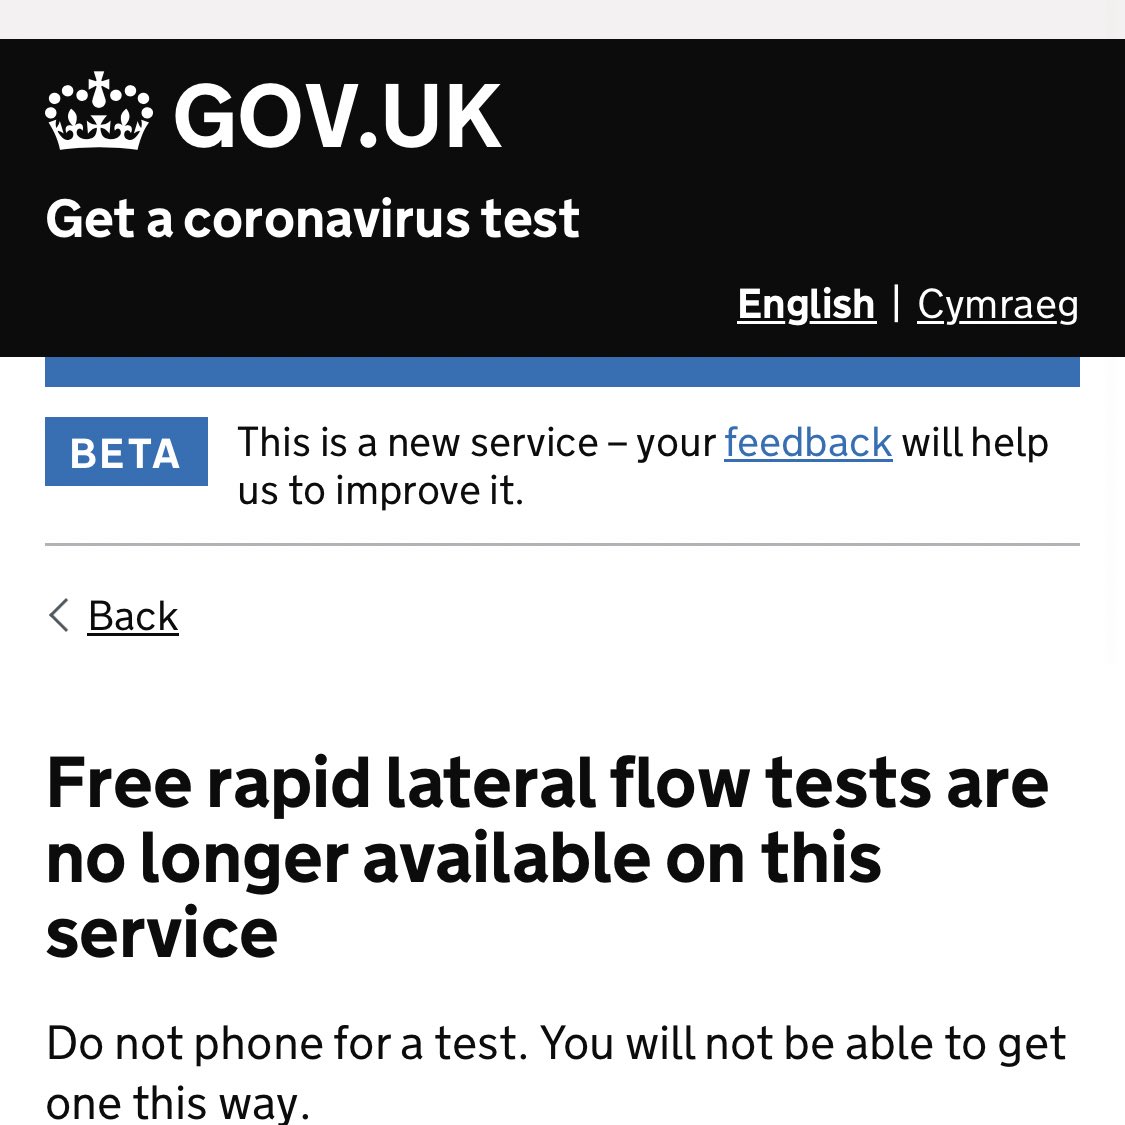 I’m sorry you just can’t get free covid tests on the nhs at ALL now?? Even if you’re CEV?? (I don’t have symptoms my family has had it, no contact it’s just a precaution)